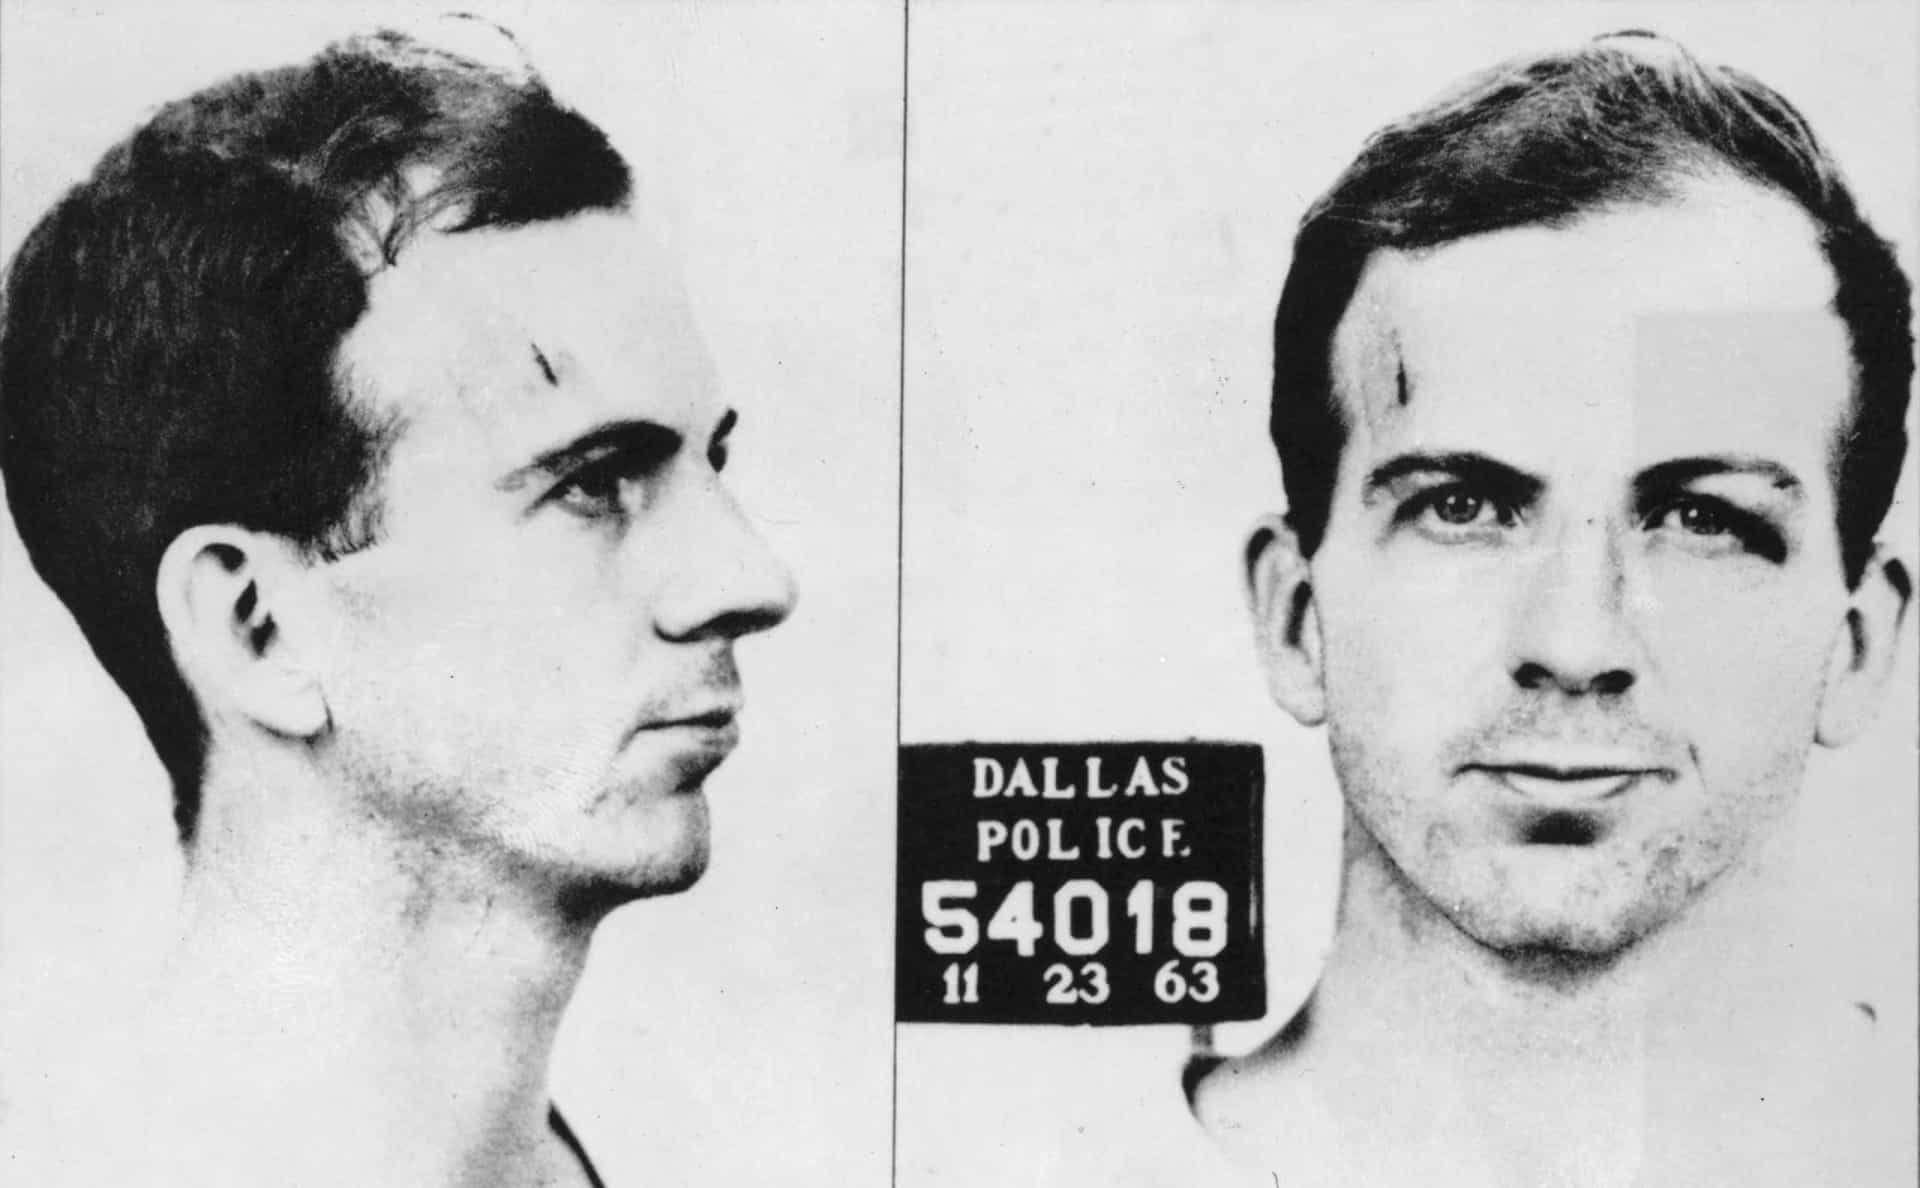 <p>A former Marine, Lee Harvey Oswald defected to the Soviet Union in 1959, returning to the United States in June 1962, at the height of the Cold War. Identified as the assassin of President John F. Kennedy, Oswald was presumed a communist sympathizer. But documents released in 2017 suggest that Soviet authorities reacted with genuine surprise to the Kennedy killing and that they considered his murder might be part of a larger right-wing coup to take over the US government.</p>